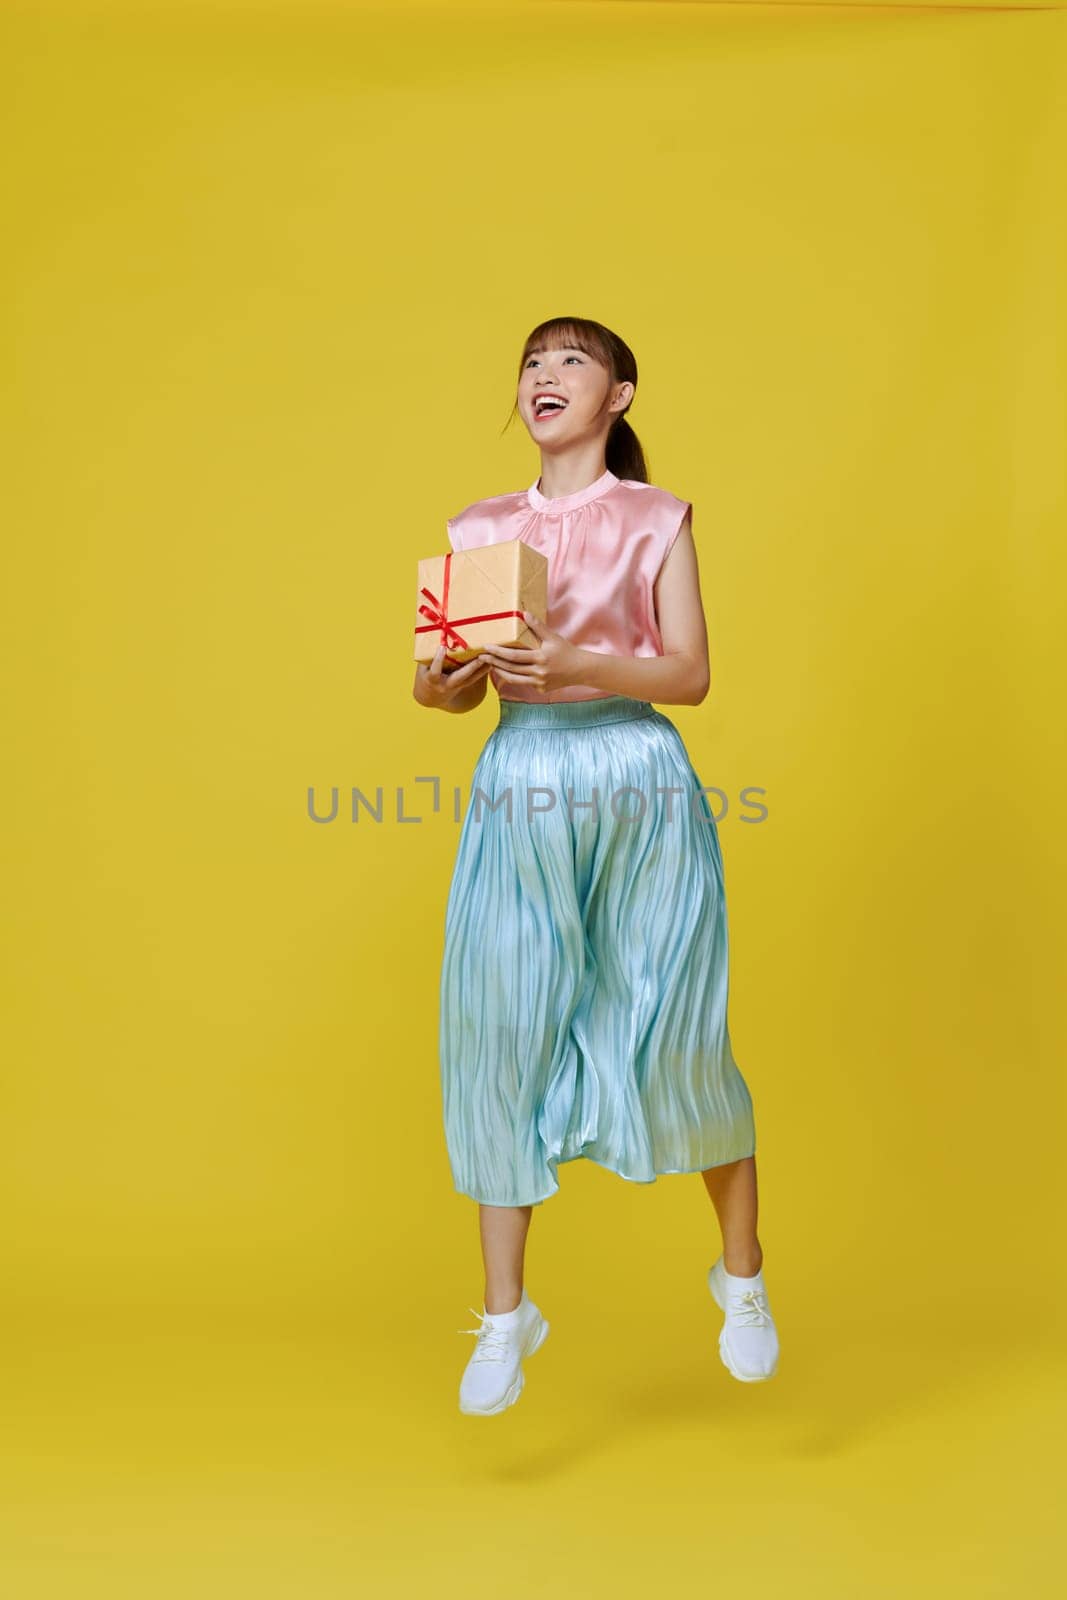 Happy pretty young woman jumping and holding wrapped gift box smiling isolated on yellow background